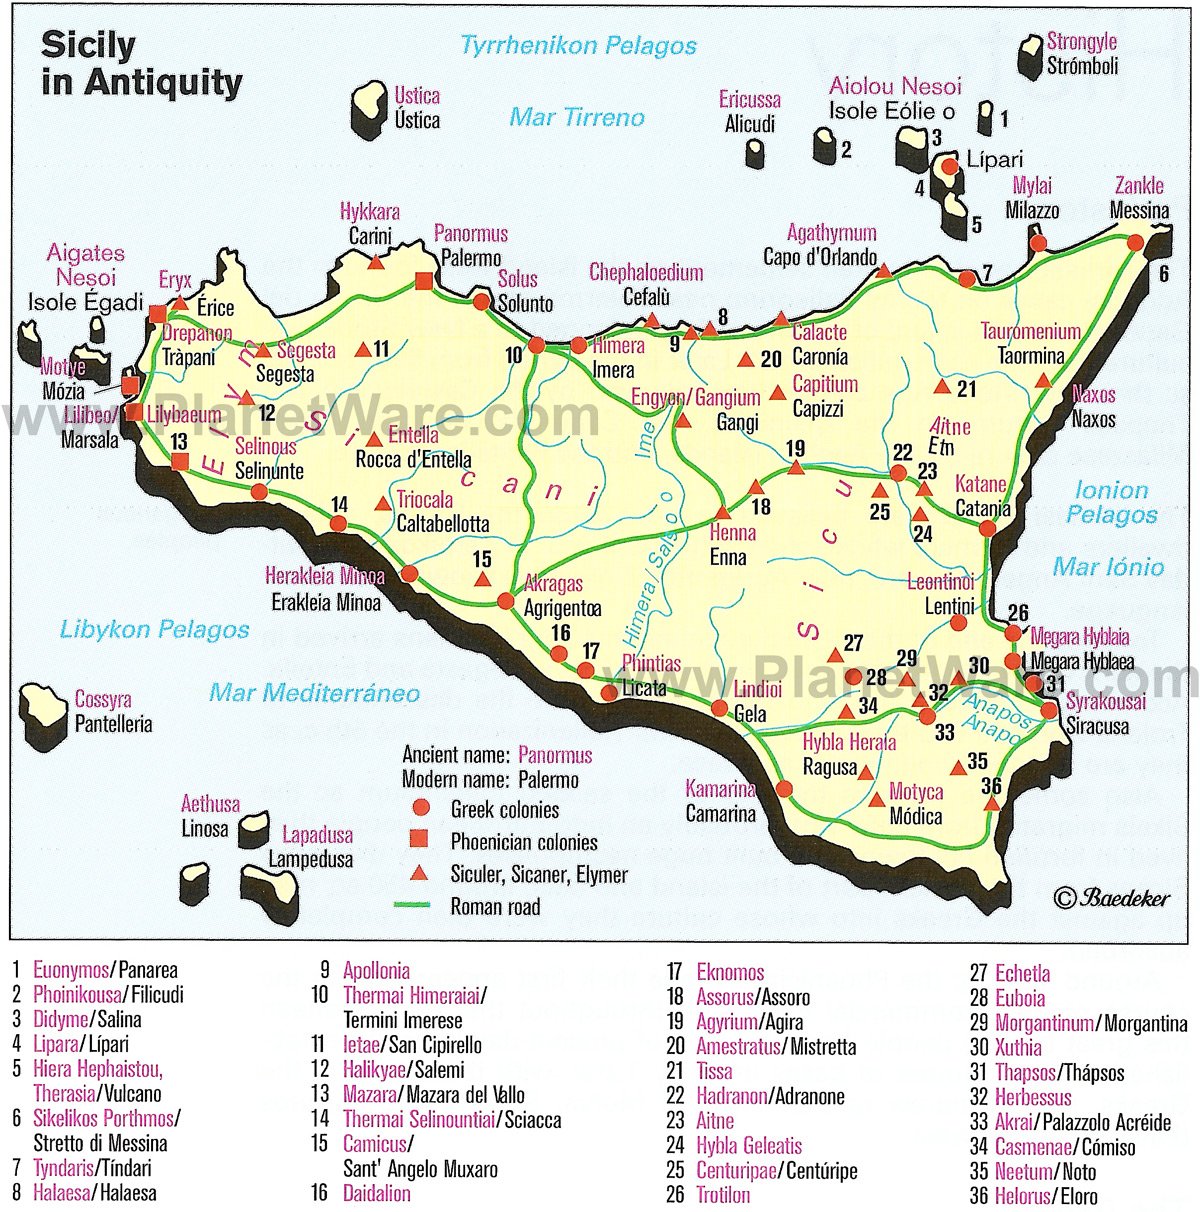 Sicily in Antiquity Map - Tourist Attractions